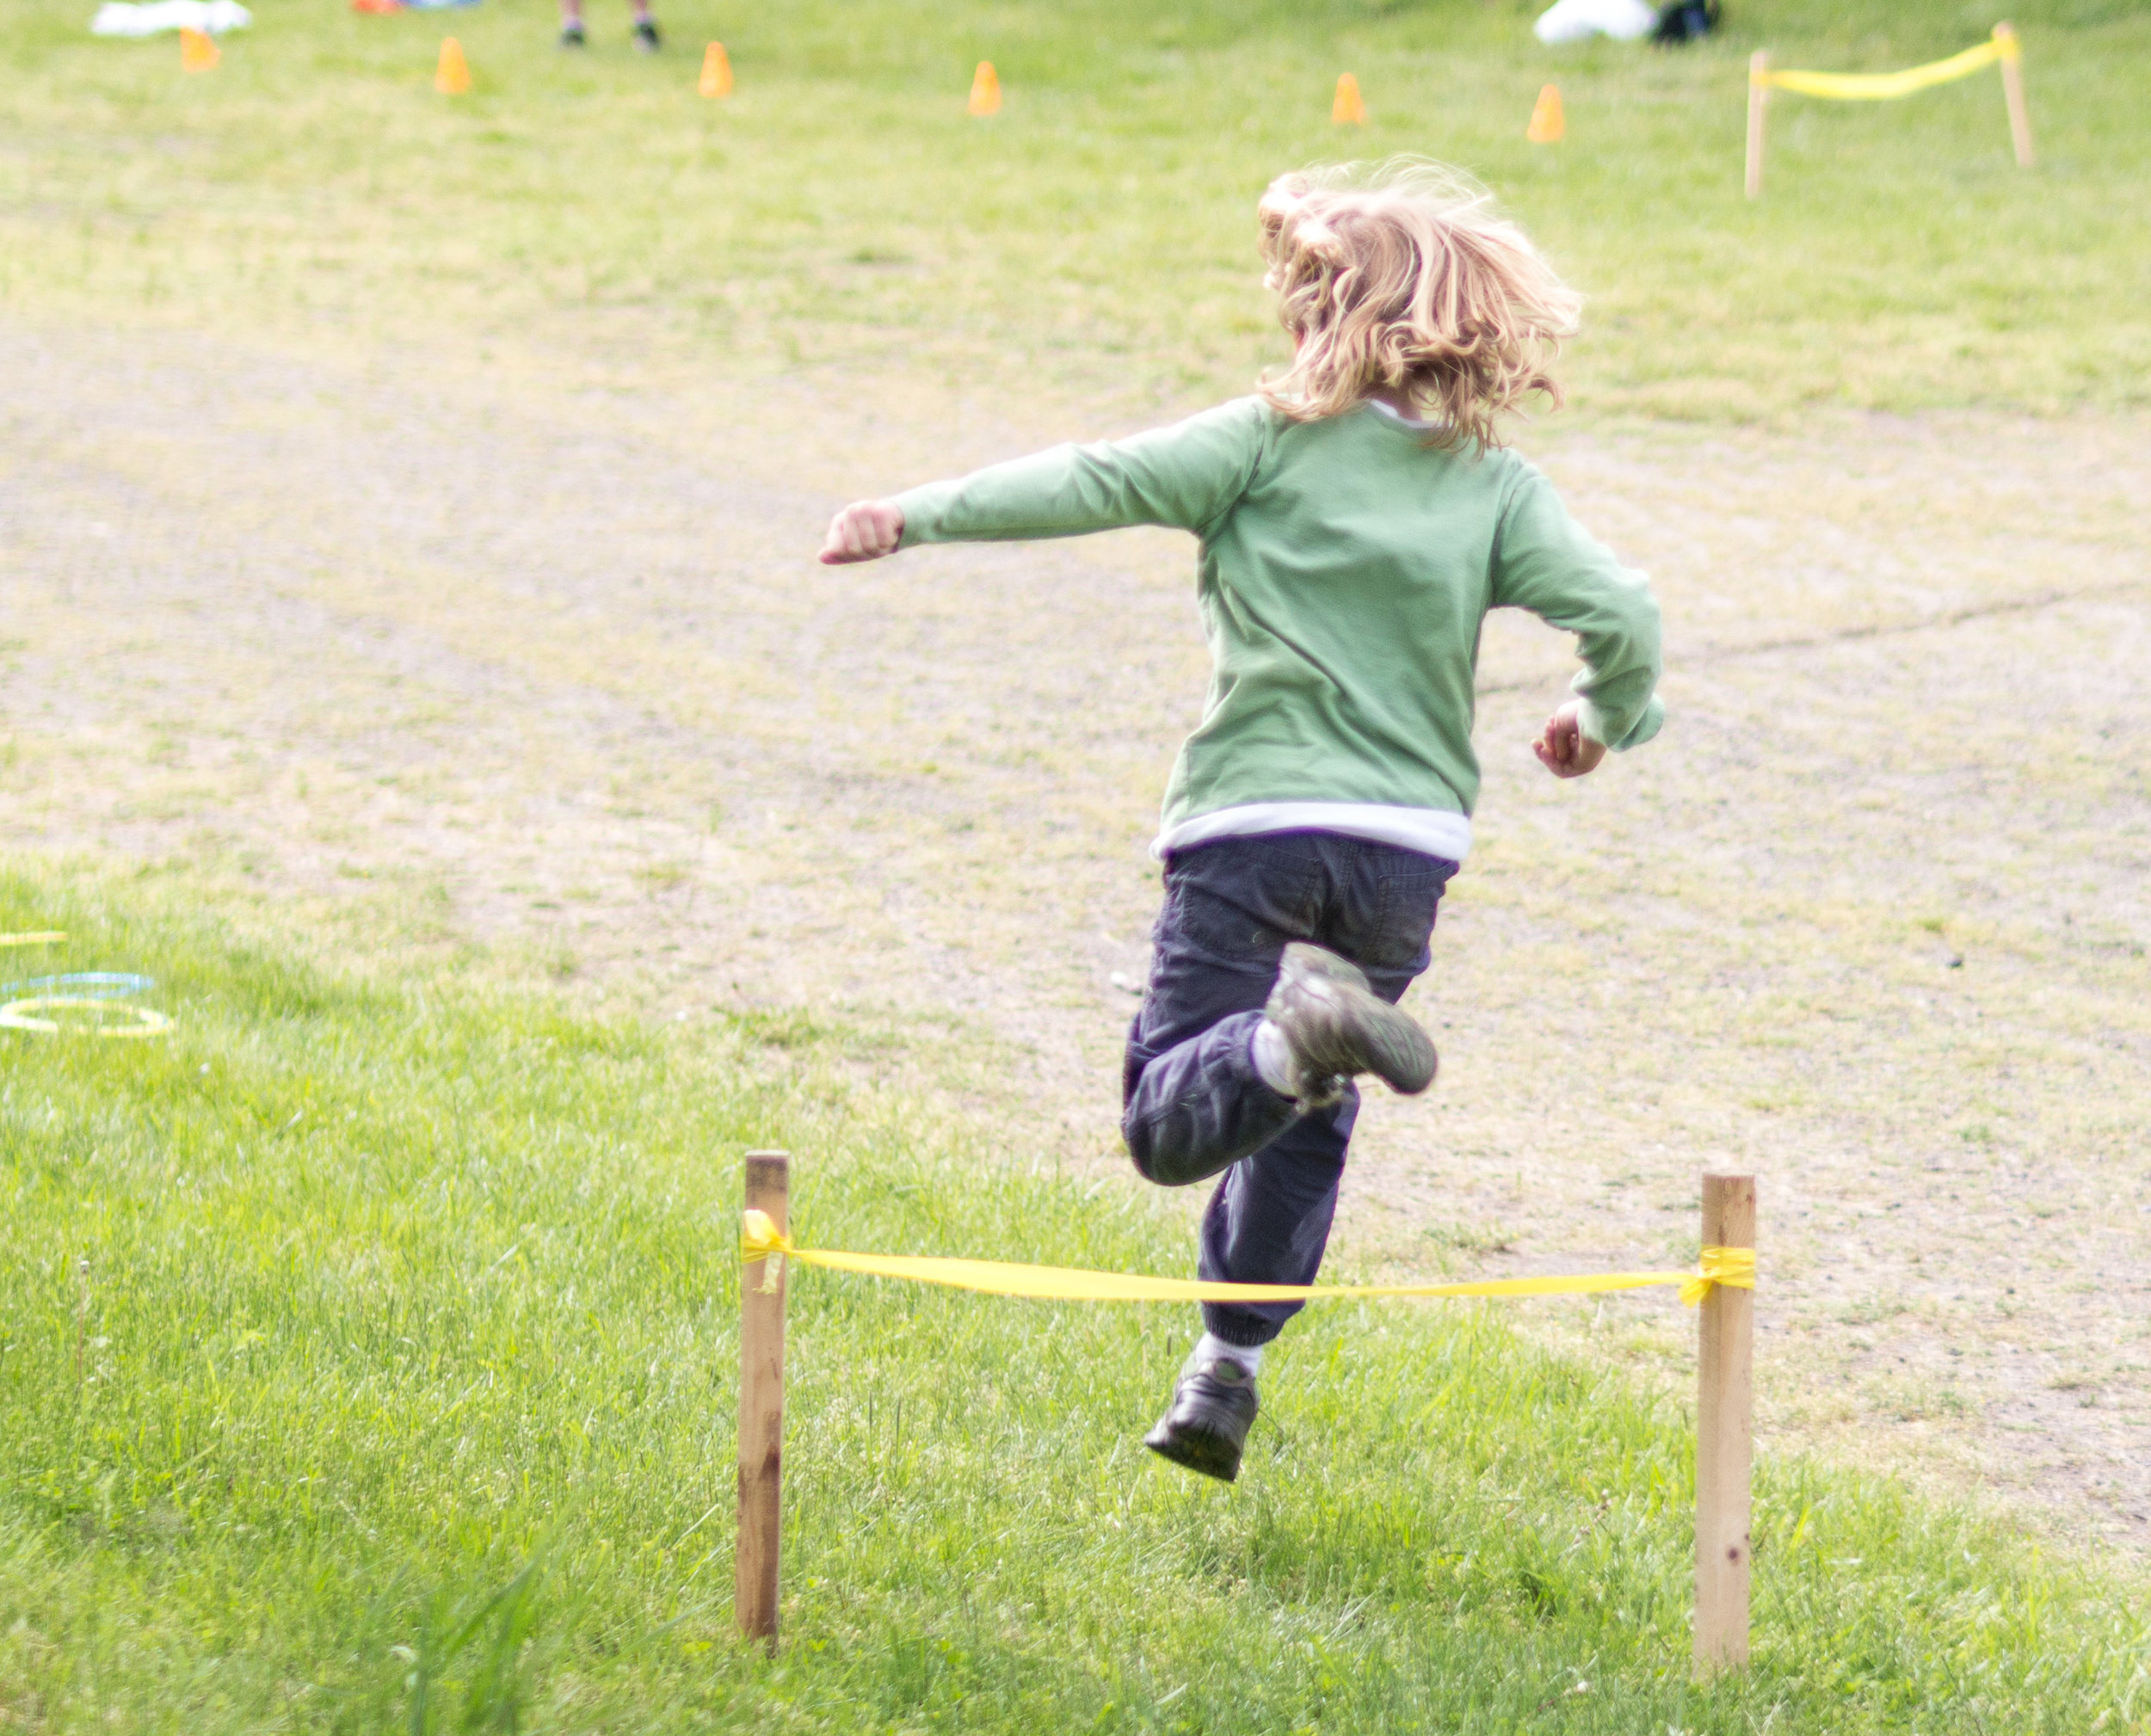 Cub Scouts Obstacle Course_10.jpg